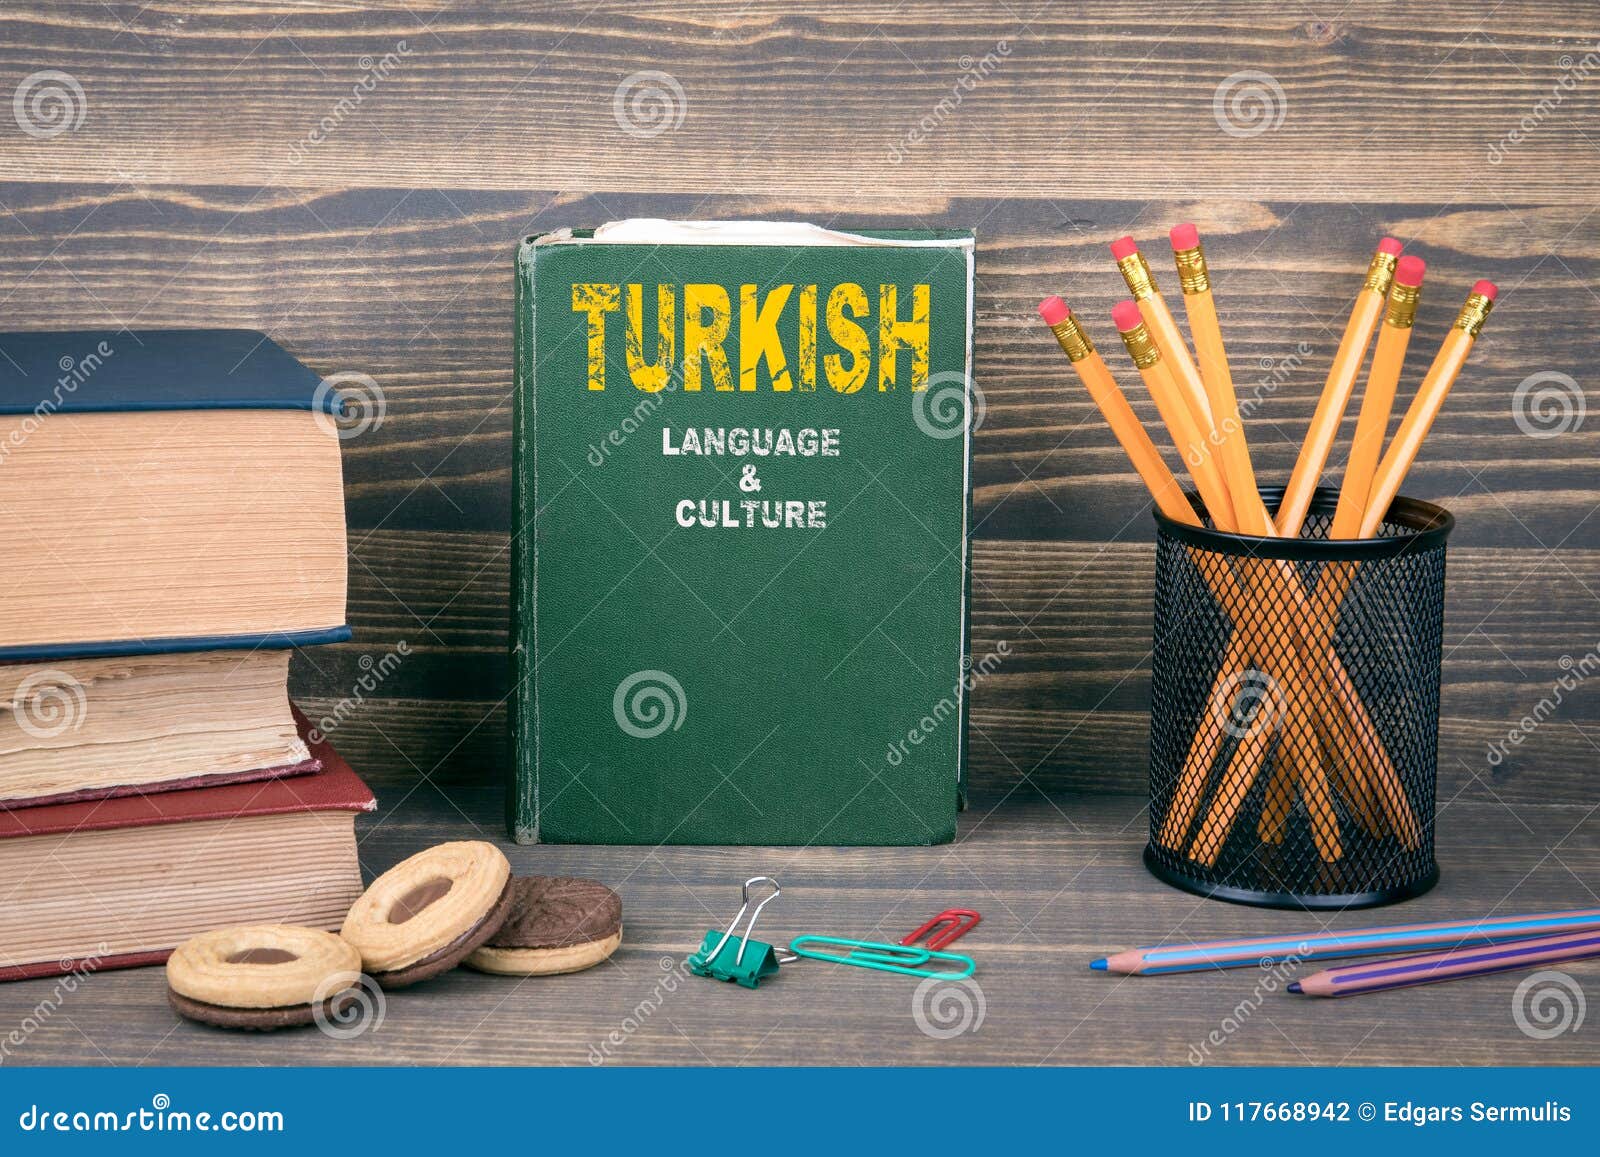 turkish language and culture concept